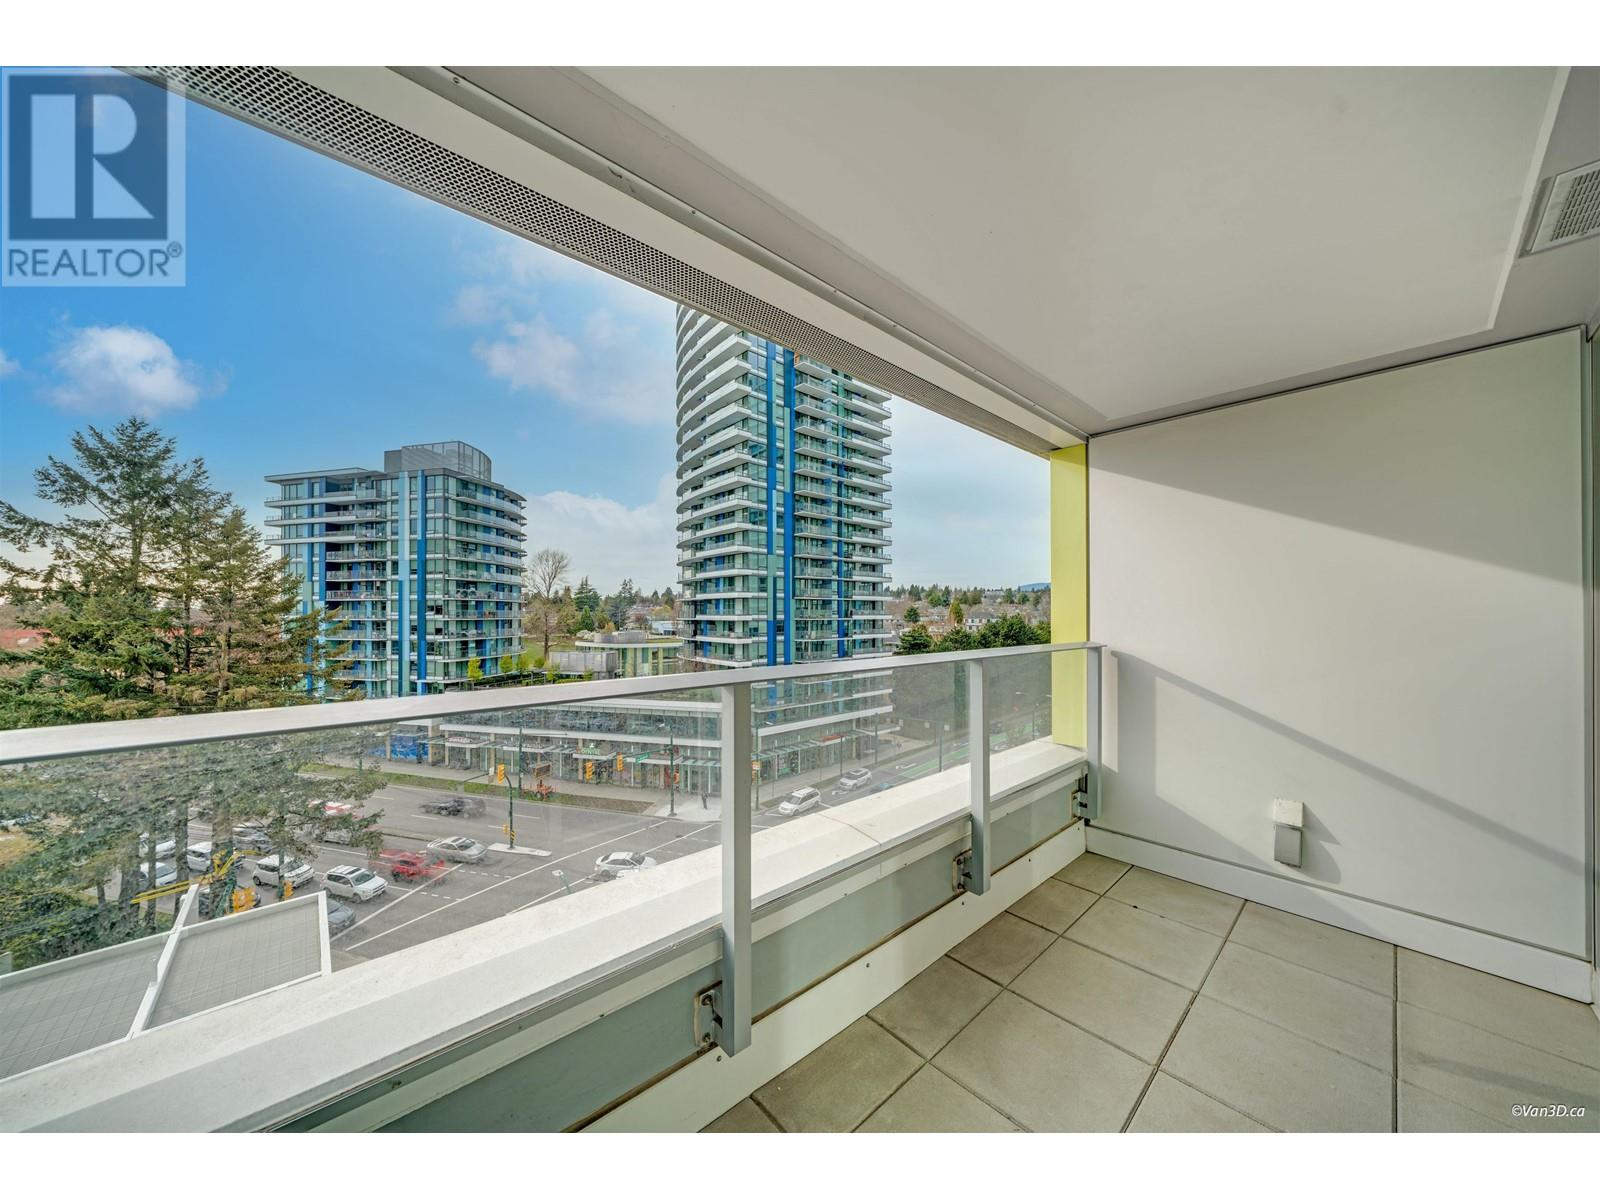 Listing Picture 11 of 23 : 705 488 SW MARINE DRIVE, Vancouver / 溫哥華 - 魯藝地產 Yvonne Lu Group - MLS Medallion Club Member